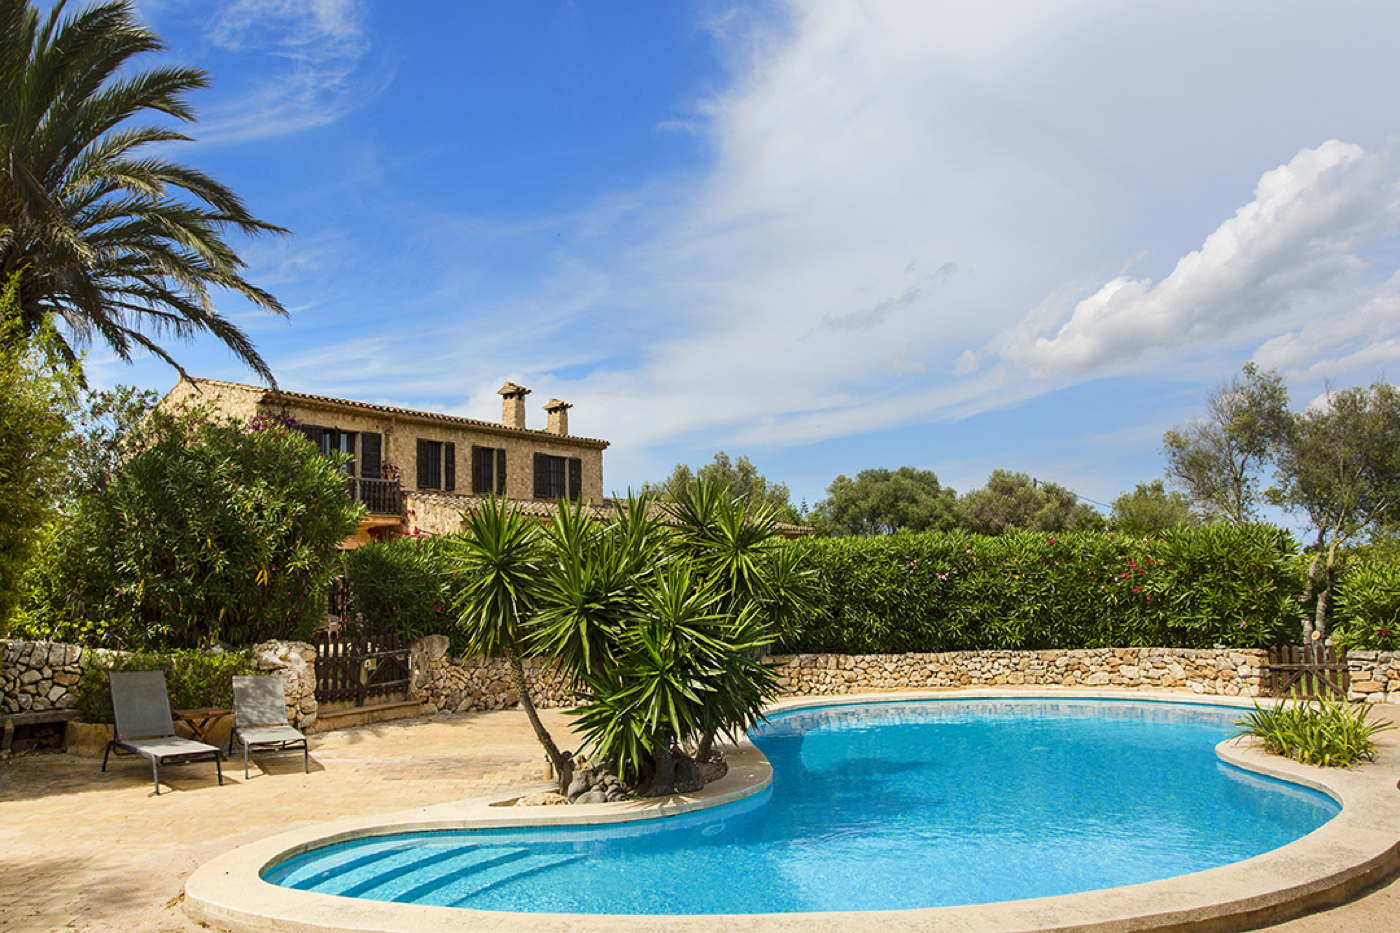 Holiday rental finca with fenced pool for up to 10 people in Majorca 